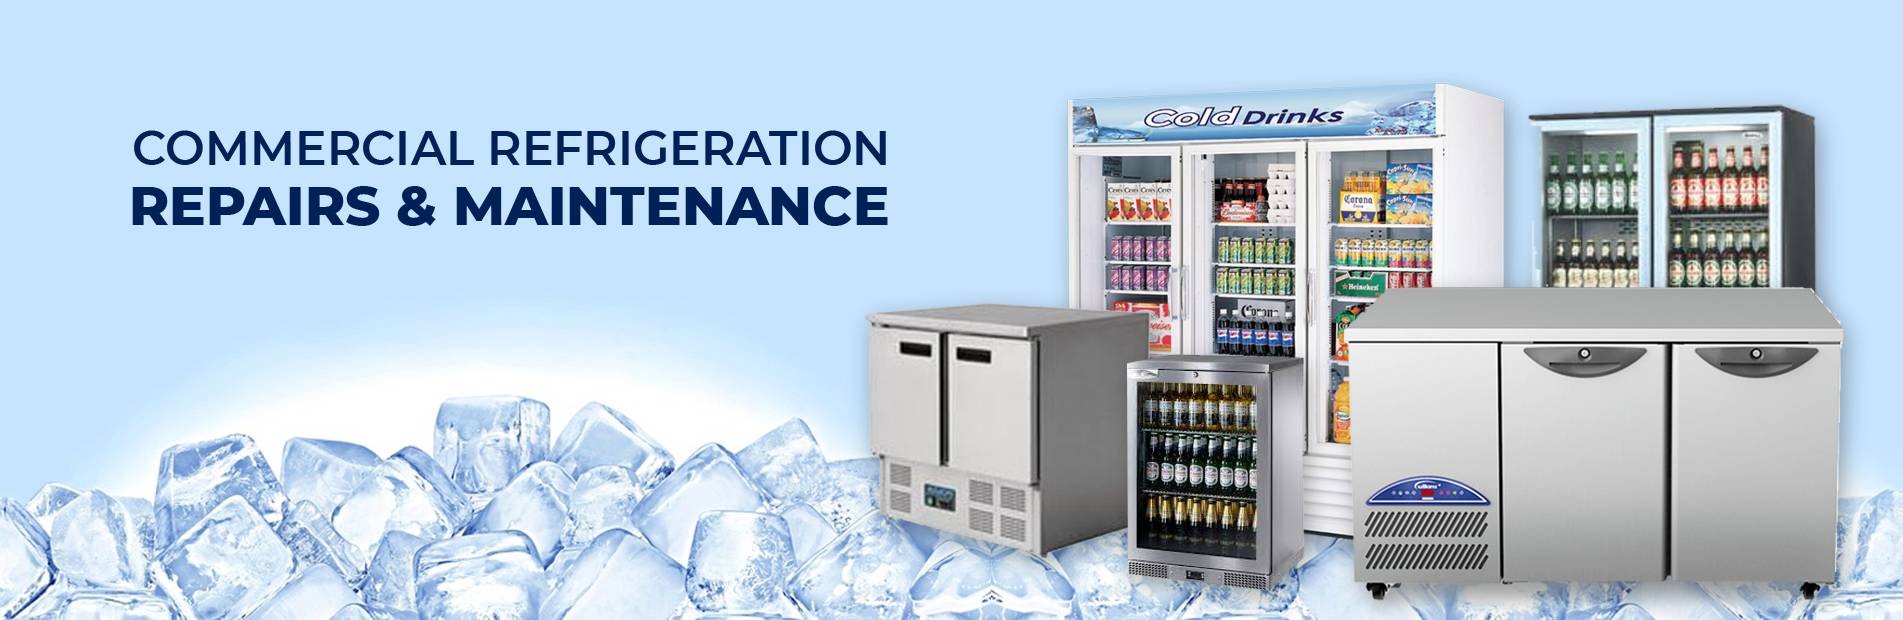 Commercial Refrigeration Repairs | Commercial Refrigeration Fridge Services